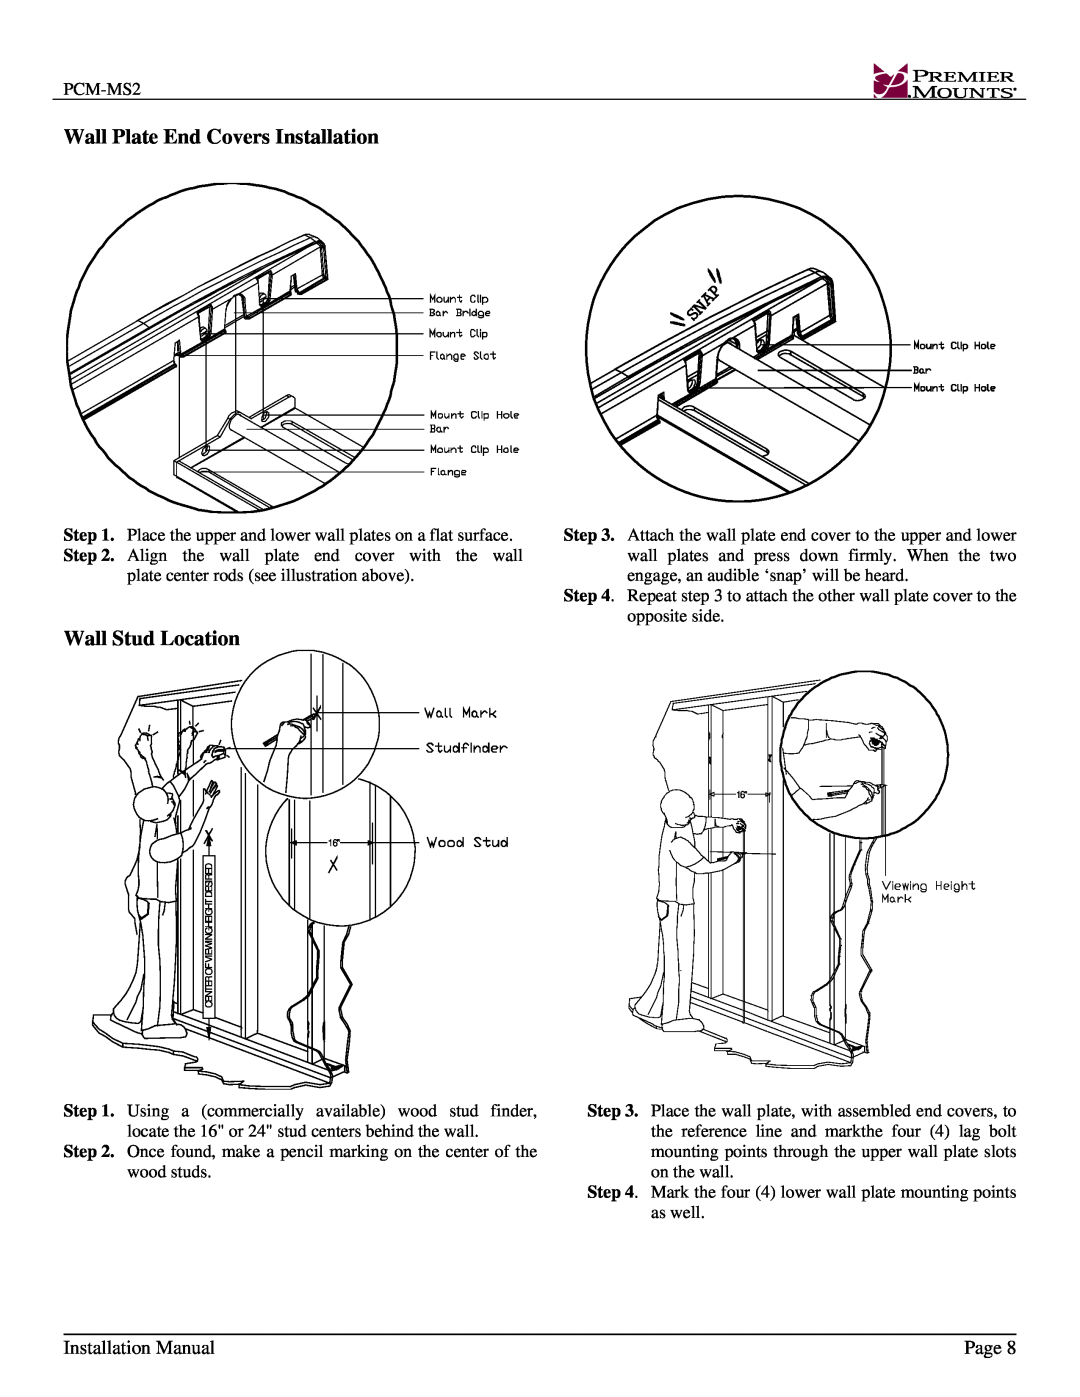 Premier Mounts PCM-MS2 installation instructions Installation Manual, Page 